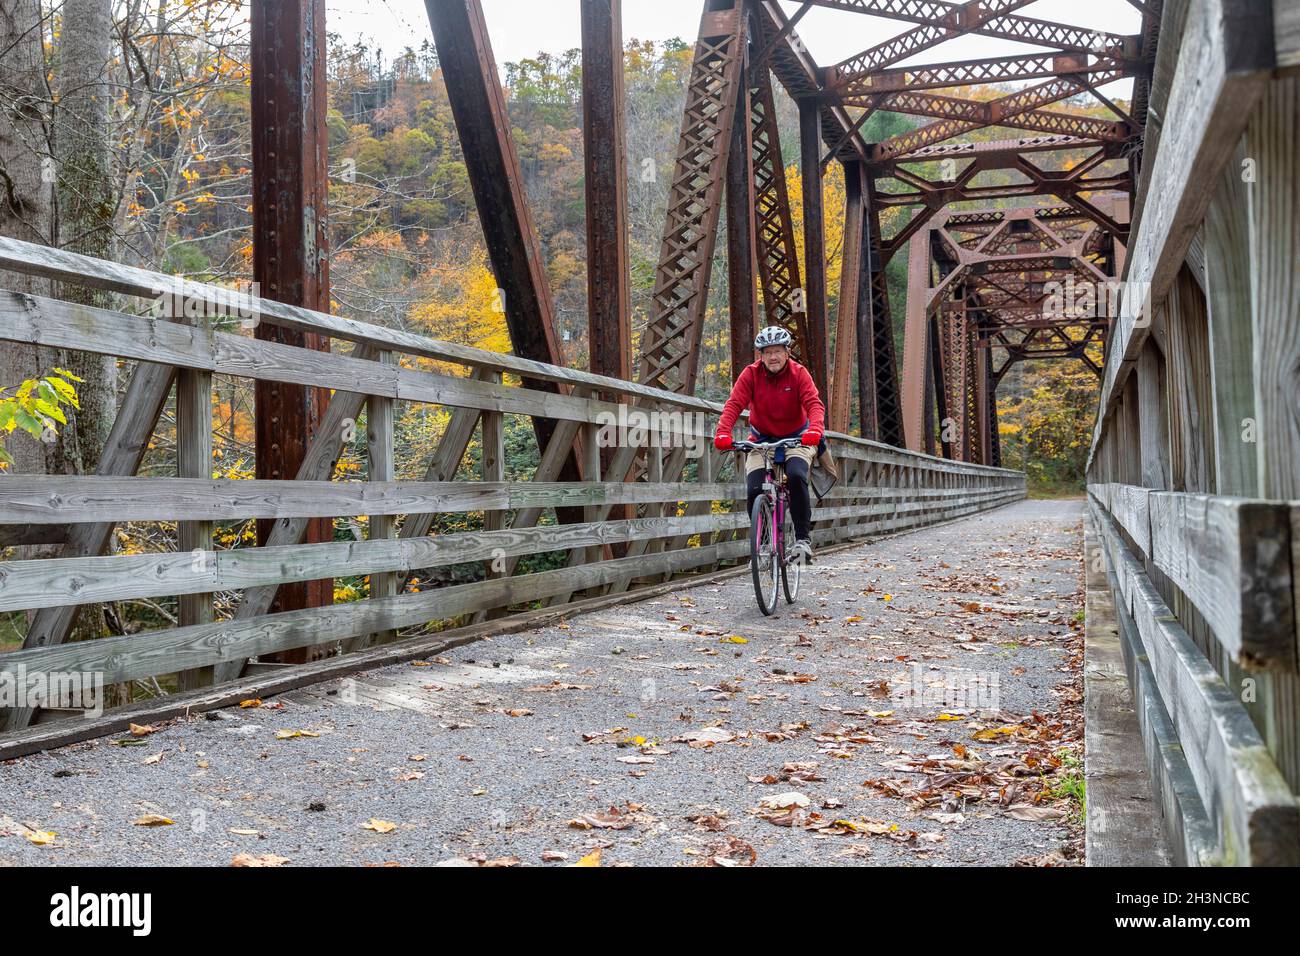 Martinton, West Virginia - John West, 75, rides his bike on the Greenbrier River Trail. The 78-mile rail trail runs along the Greenbrier River. Now a Stock Photo